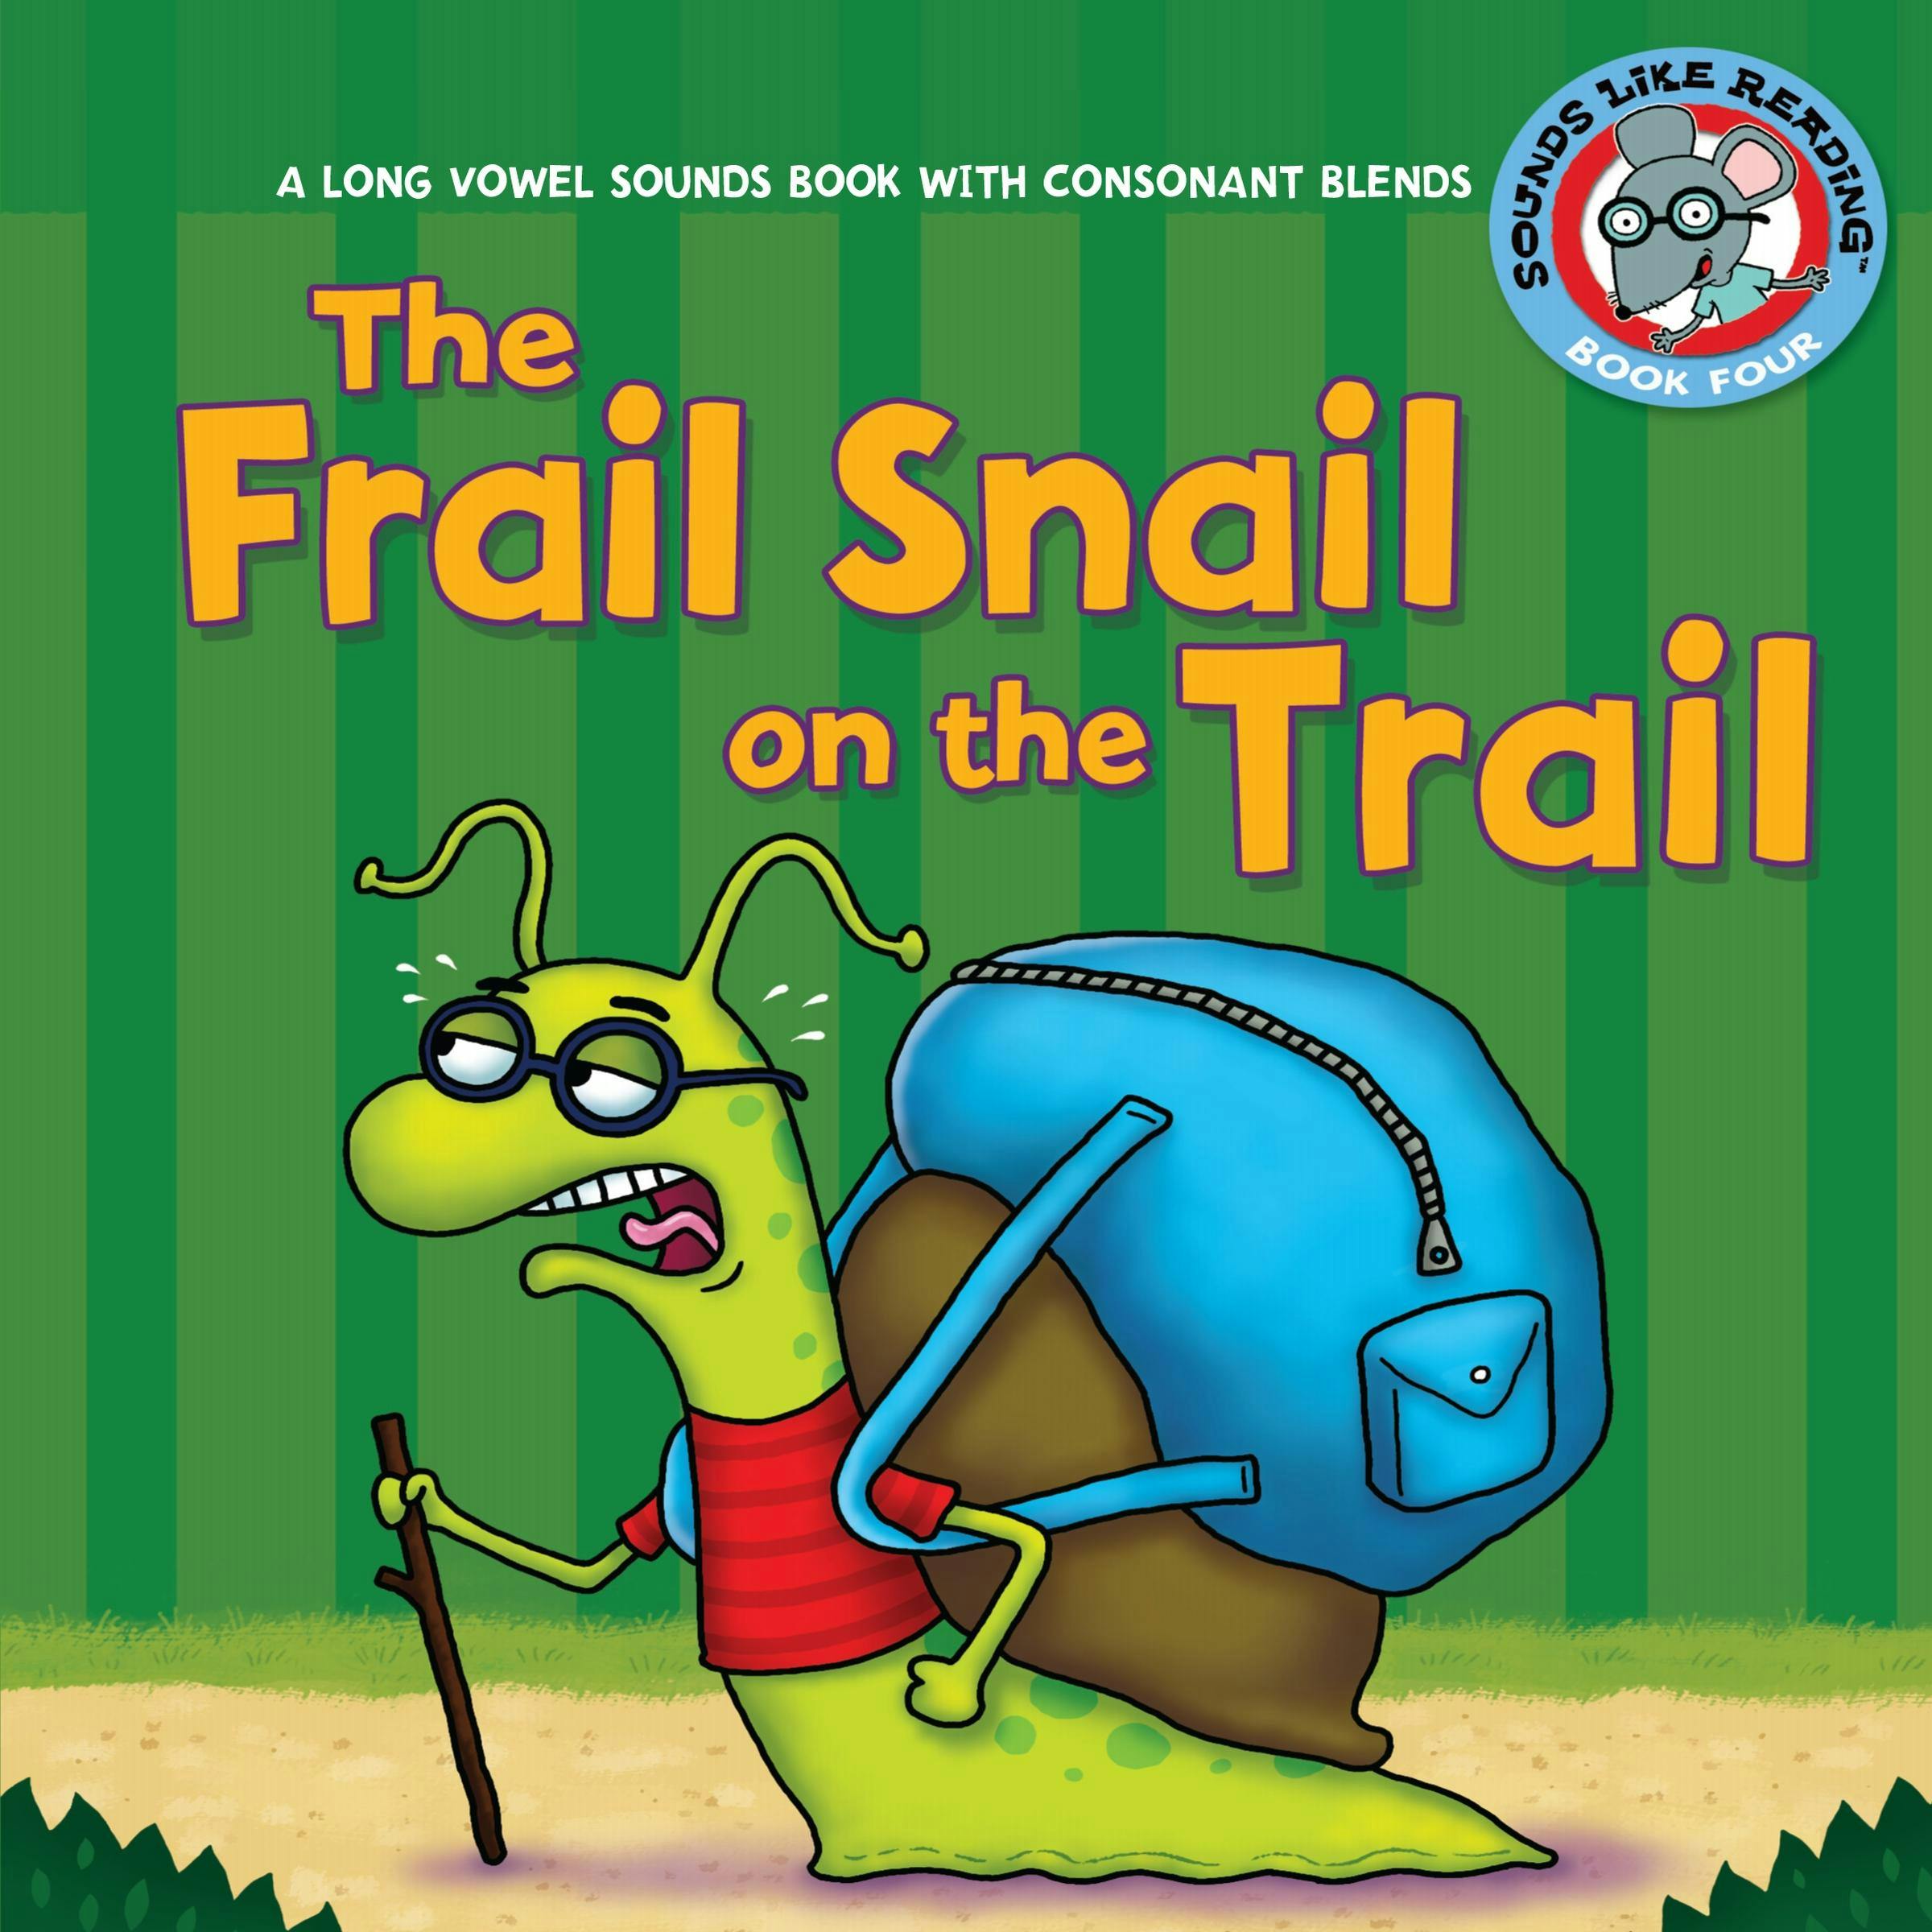 The Frail Snail on the Trail: A Long Vowel Sounds Book with Consonant Blends - Jason Miskimins, Brian P. Cleary